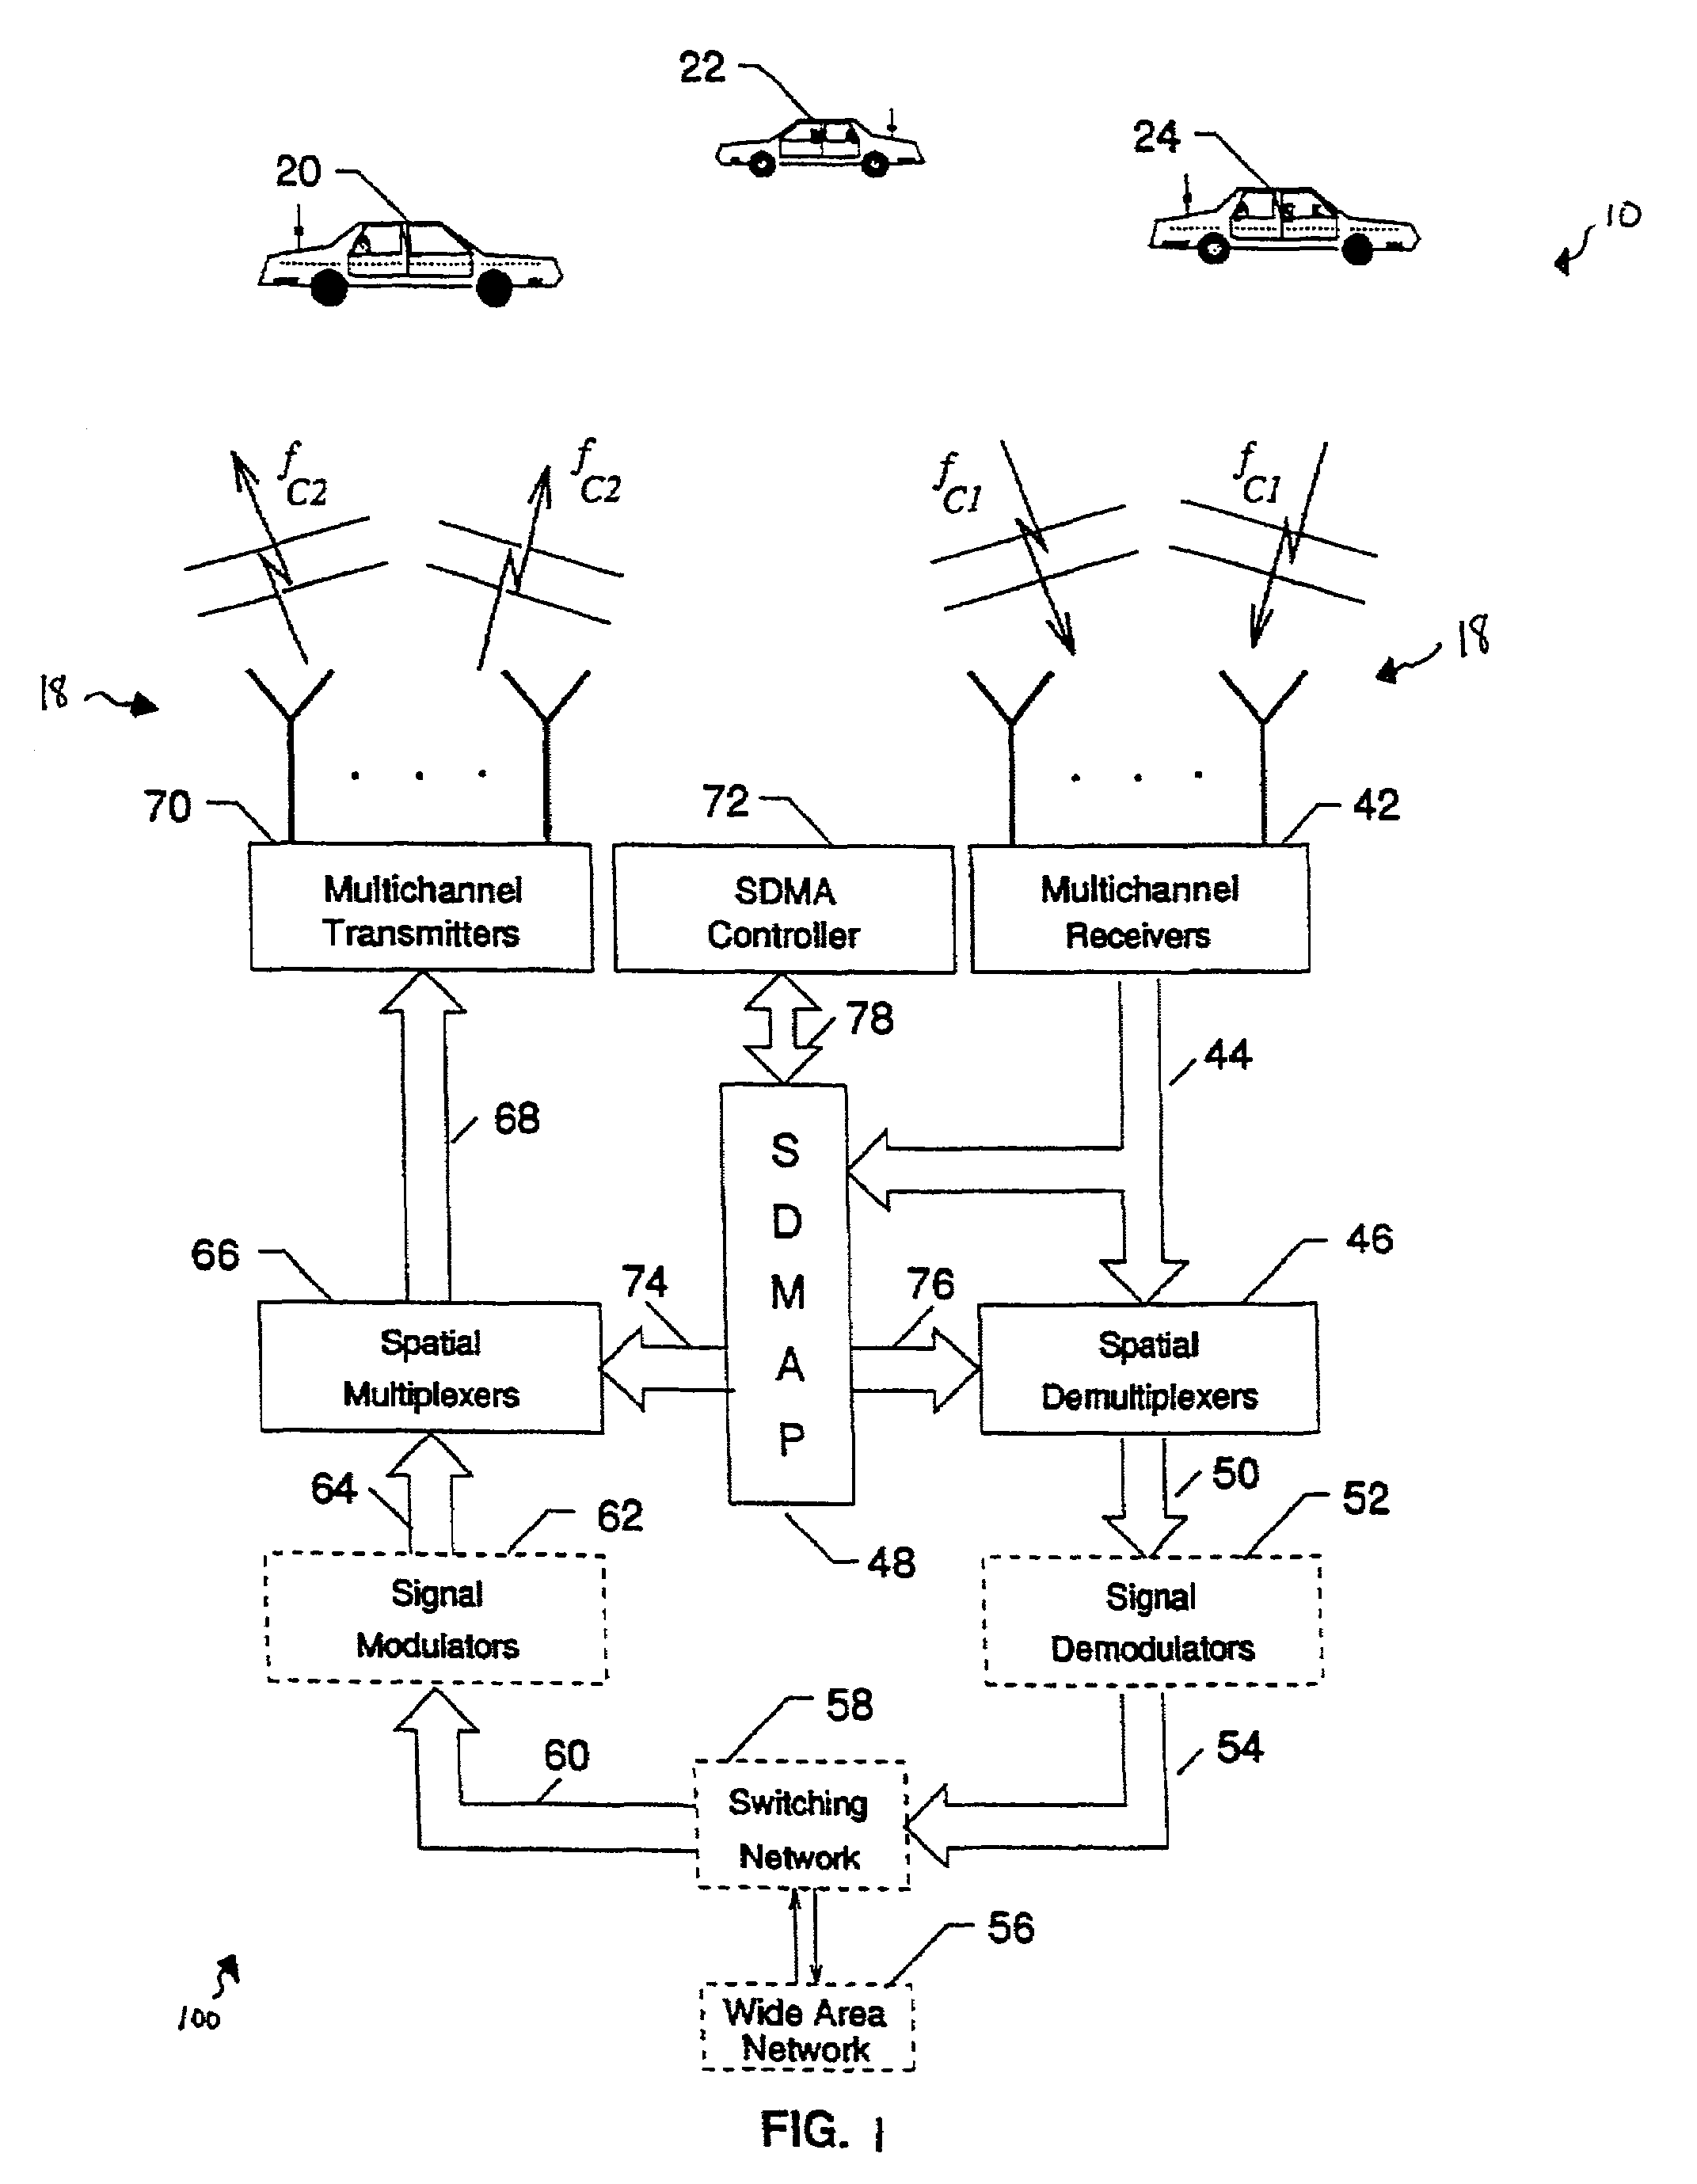 Channel assignments in a wireless communication system having spatial channels including enhancements in anticipation of new subscriber requests